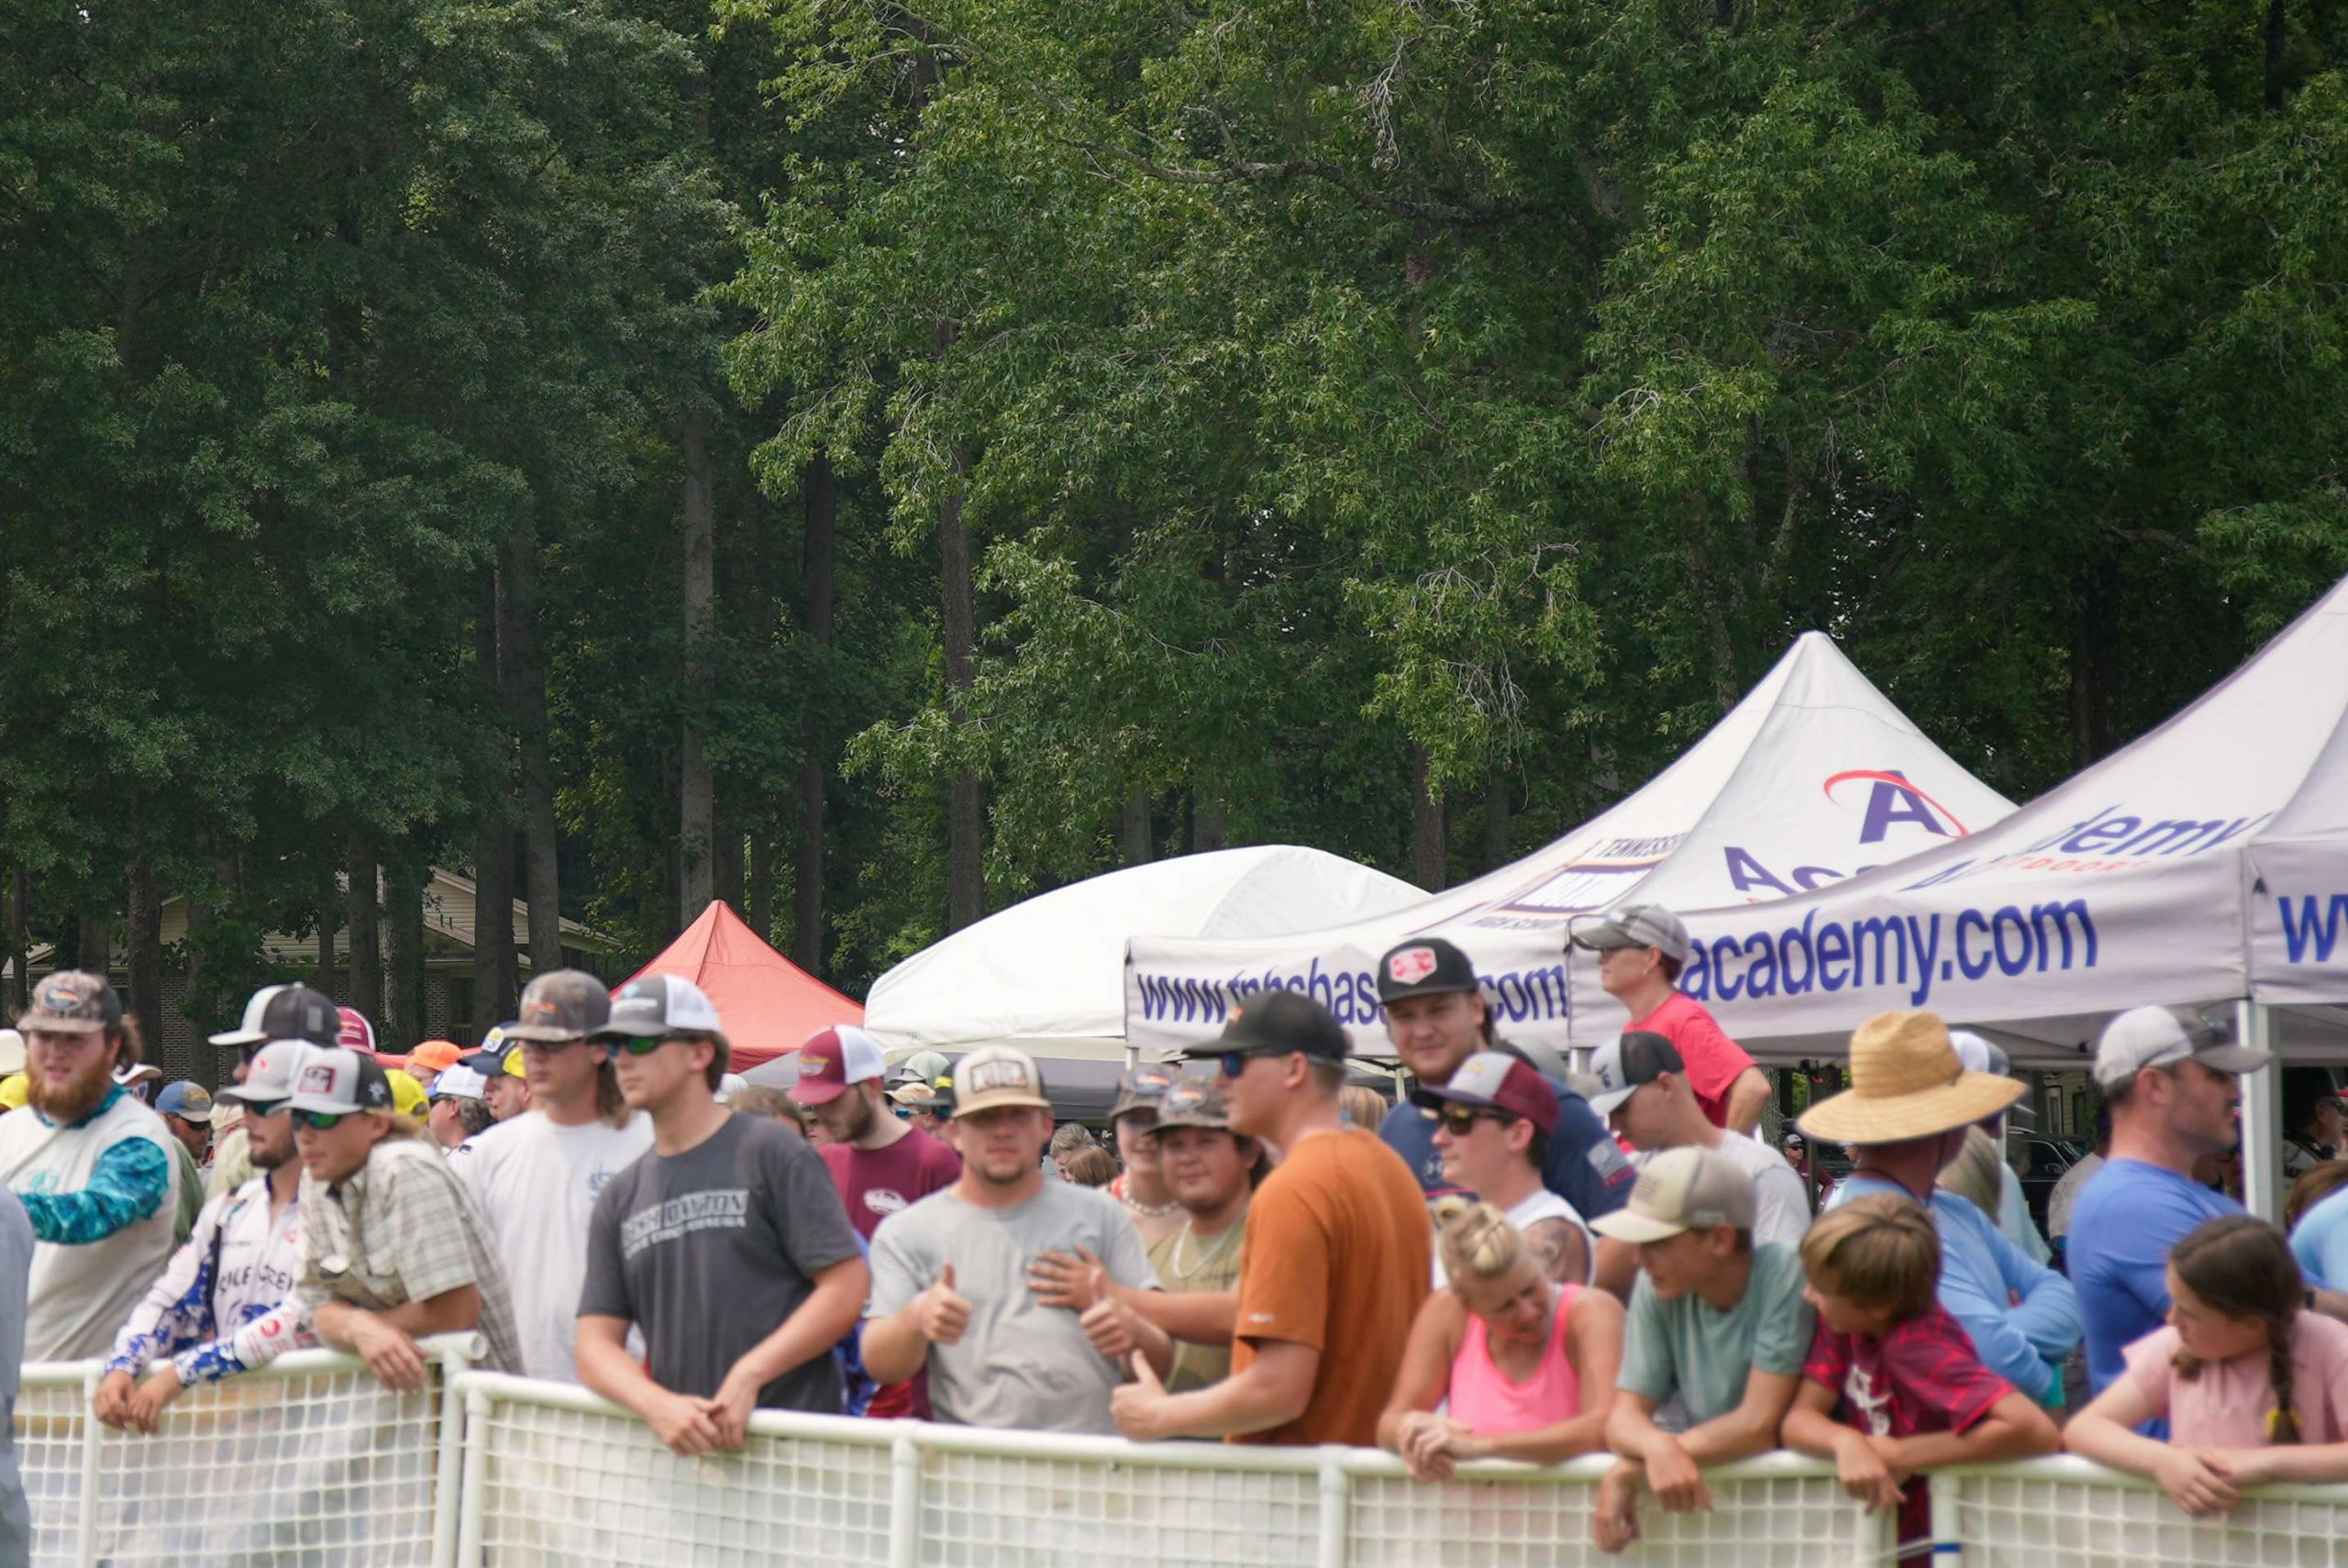 Friends and family gathered from all over the U.S. to cheer on these high school anglers that made it to Championship Saturday. 